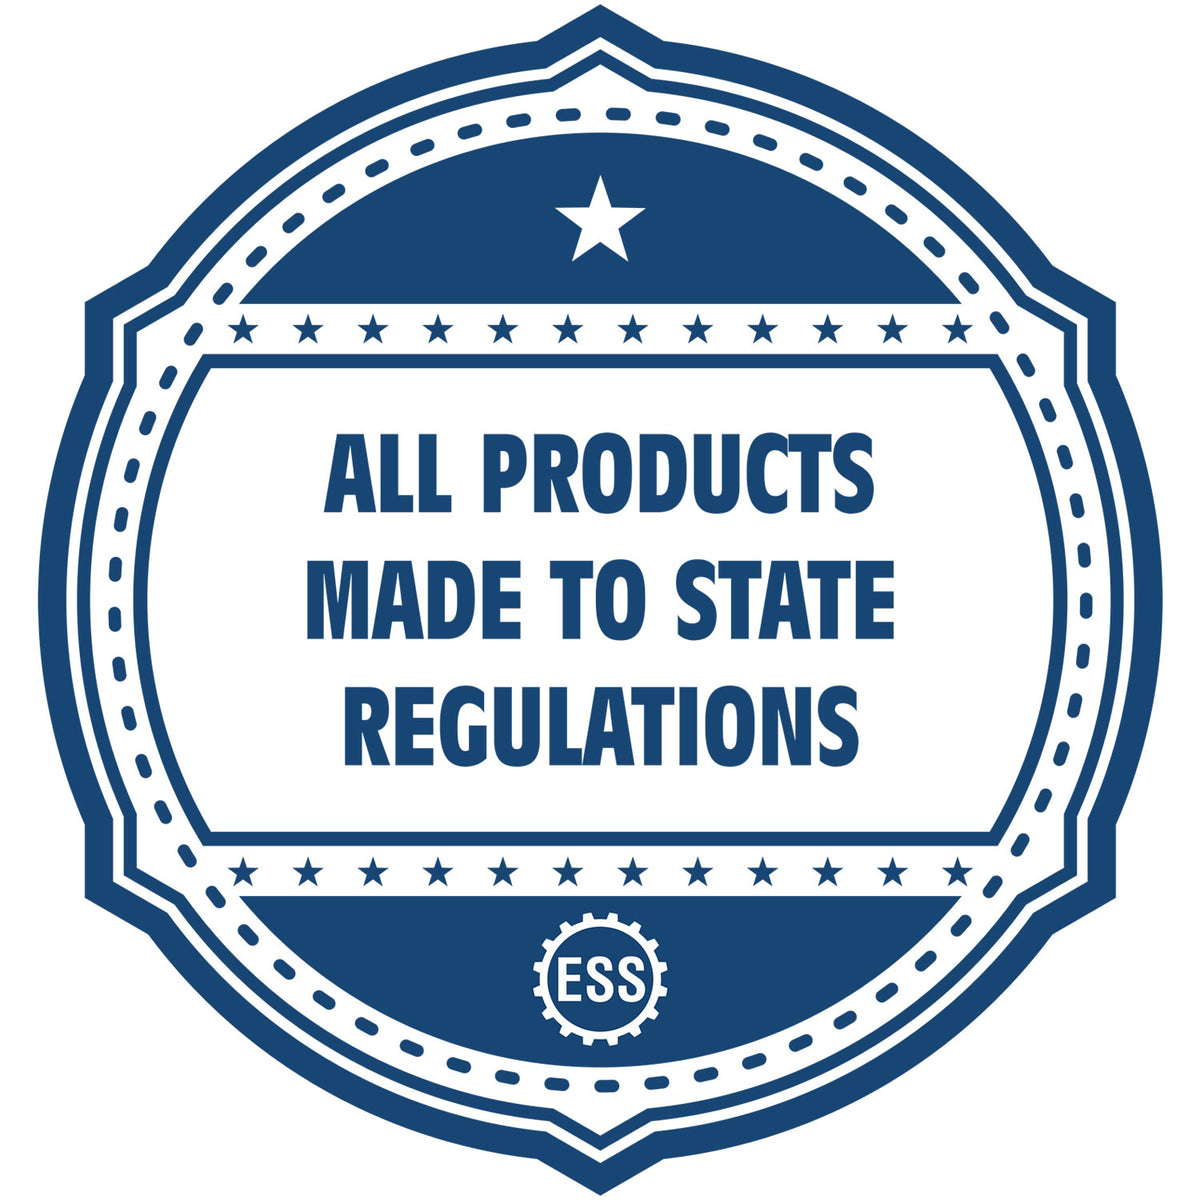 A blue icon or badge for the Illinois Professional Geologist Seal Stamp showing that this product is made in compliance with state regulations.